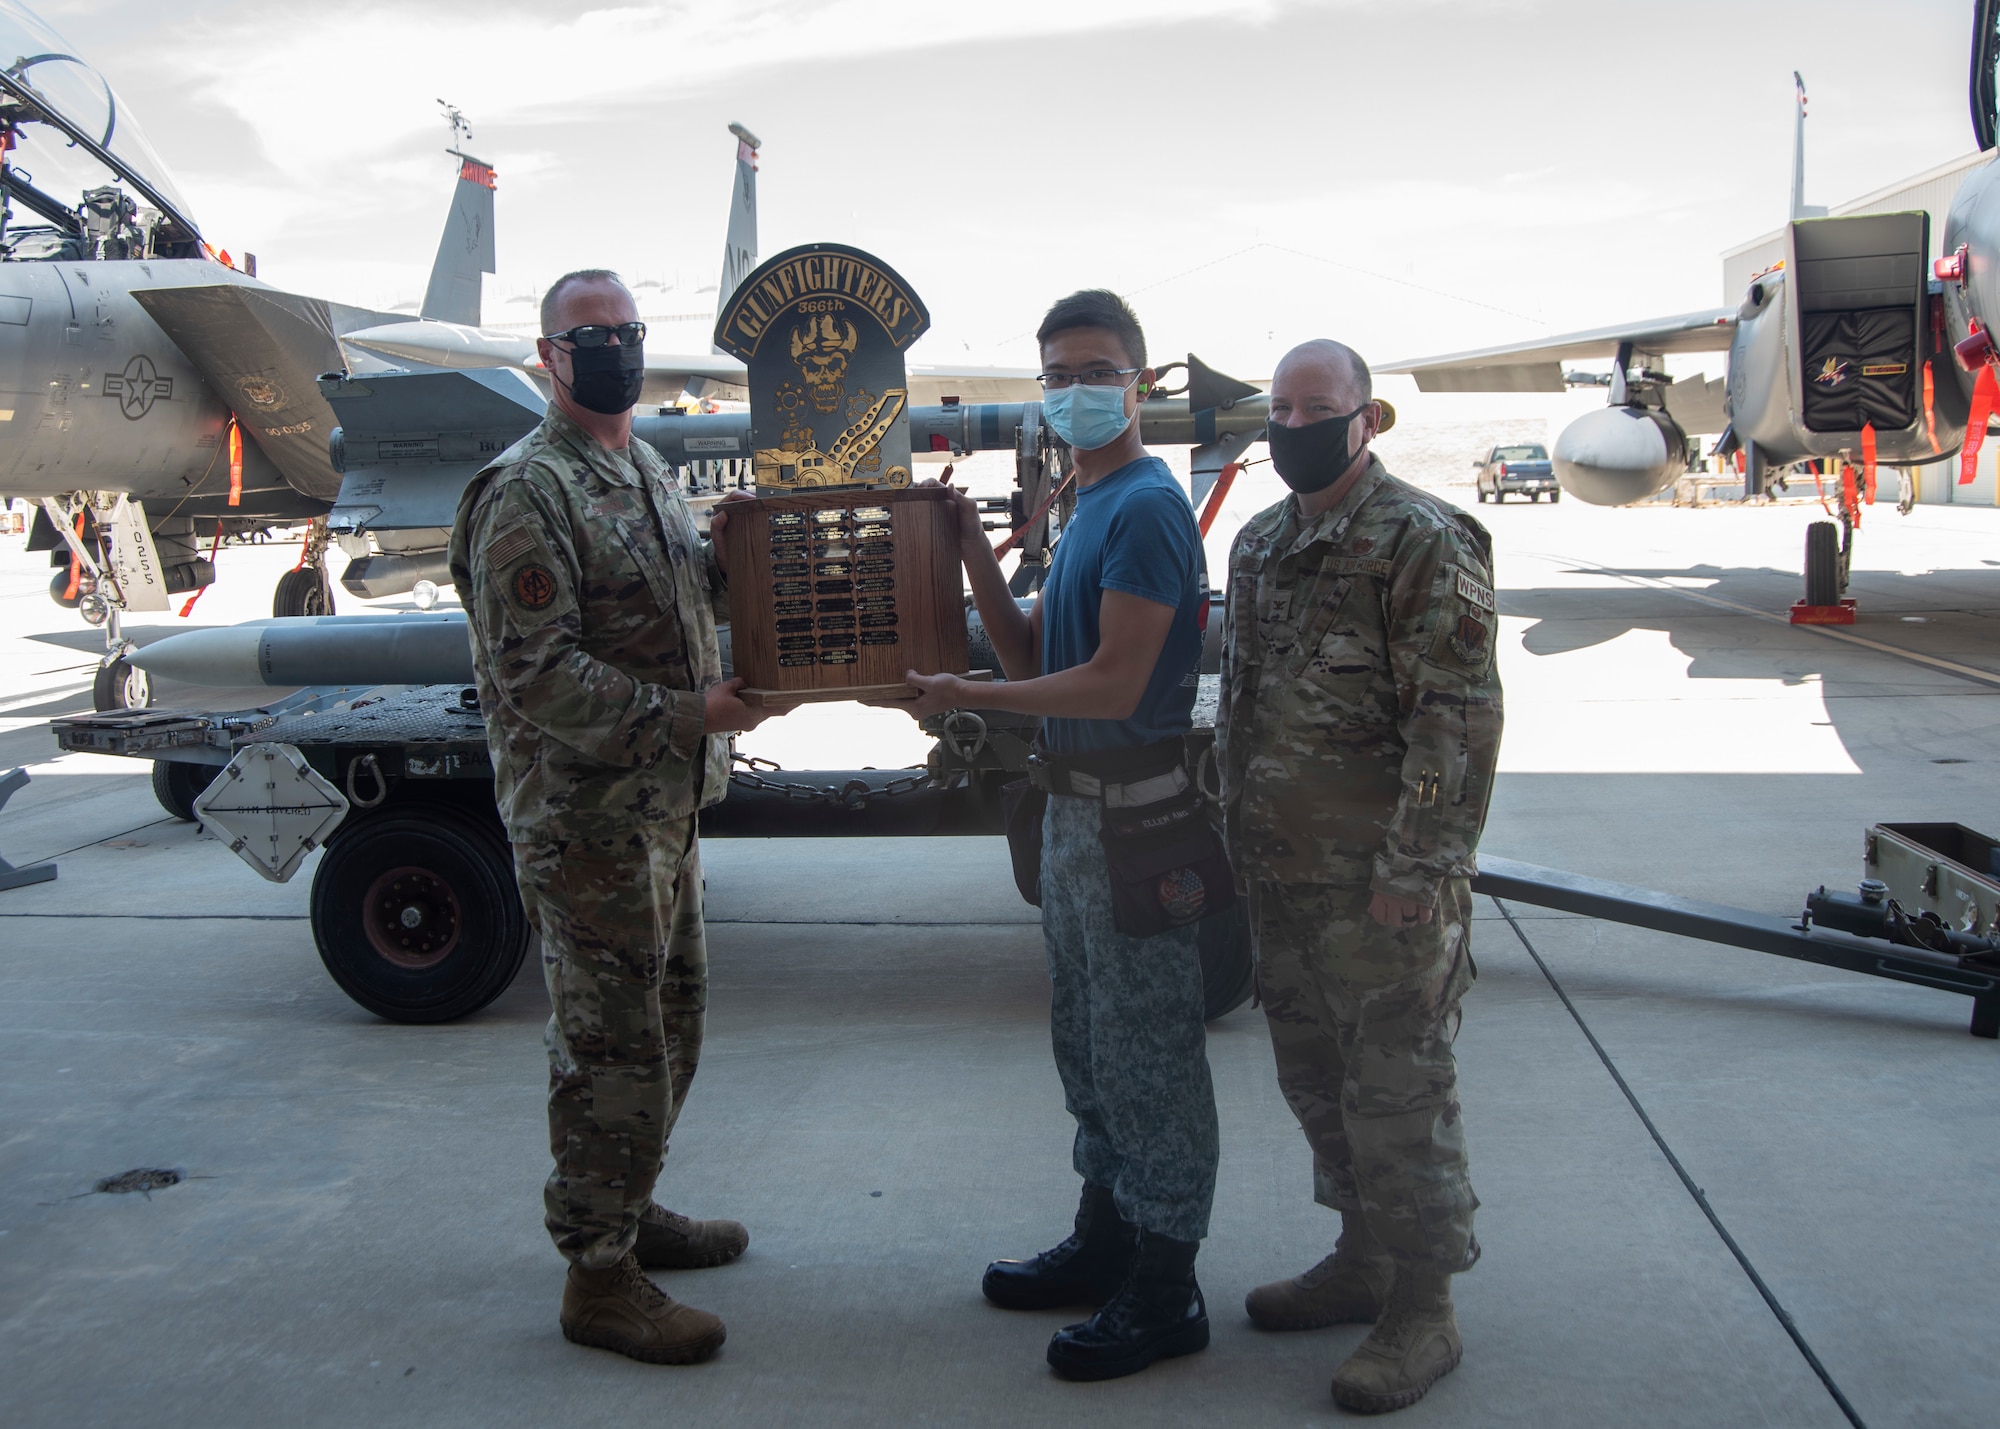 Two Airmen from the United States Air Force and one Airman from Republic of Singapore Air Force pose for a photo with the Jammer Vehicle Competition trophy.